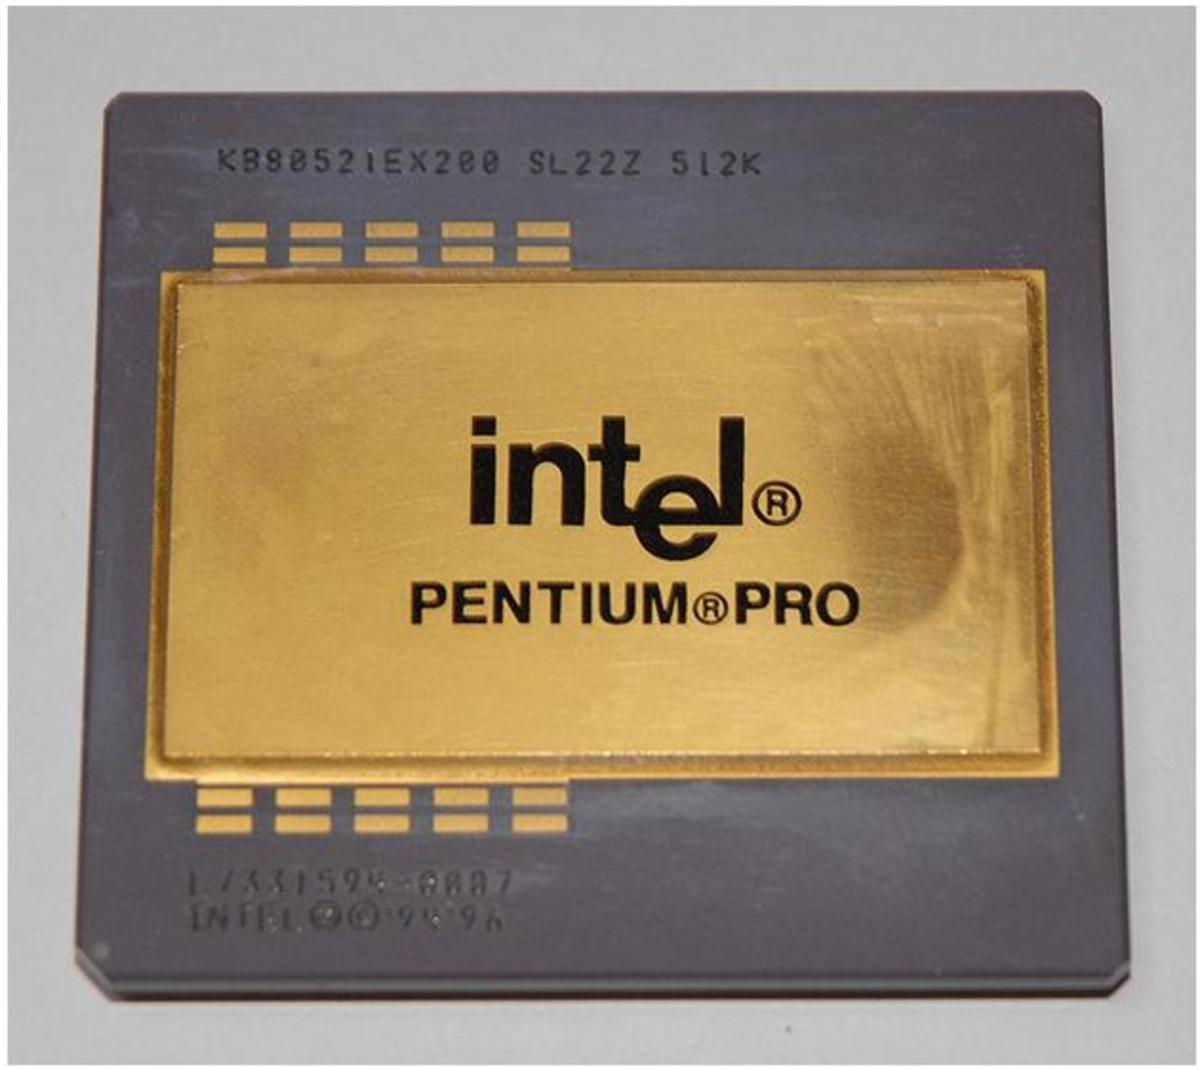 Intel Pentium Pro Obtained under Creative Commons License from http://www.flickr.com/photos/lrosa/2168719028/